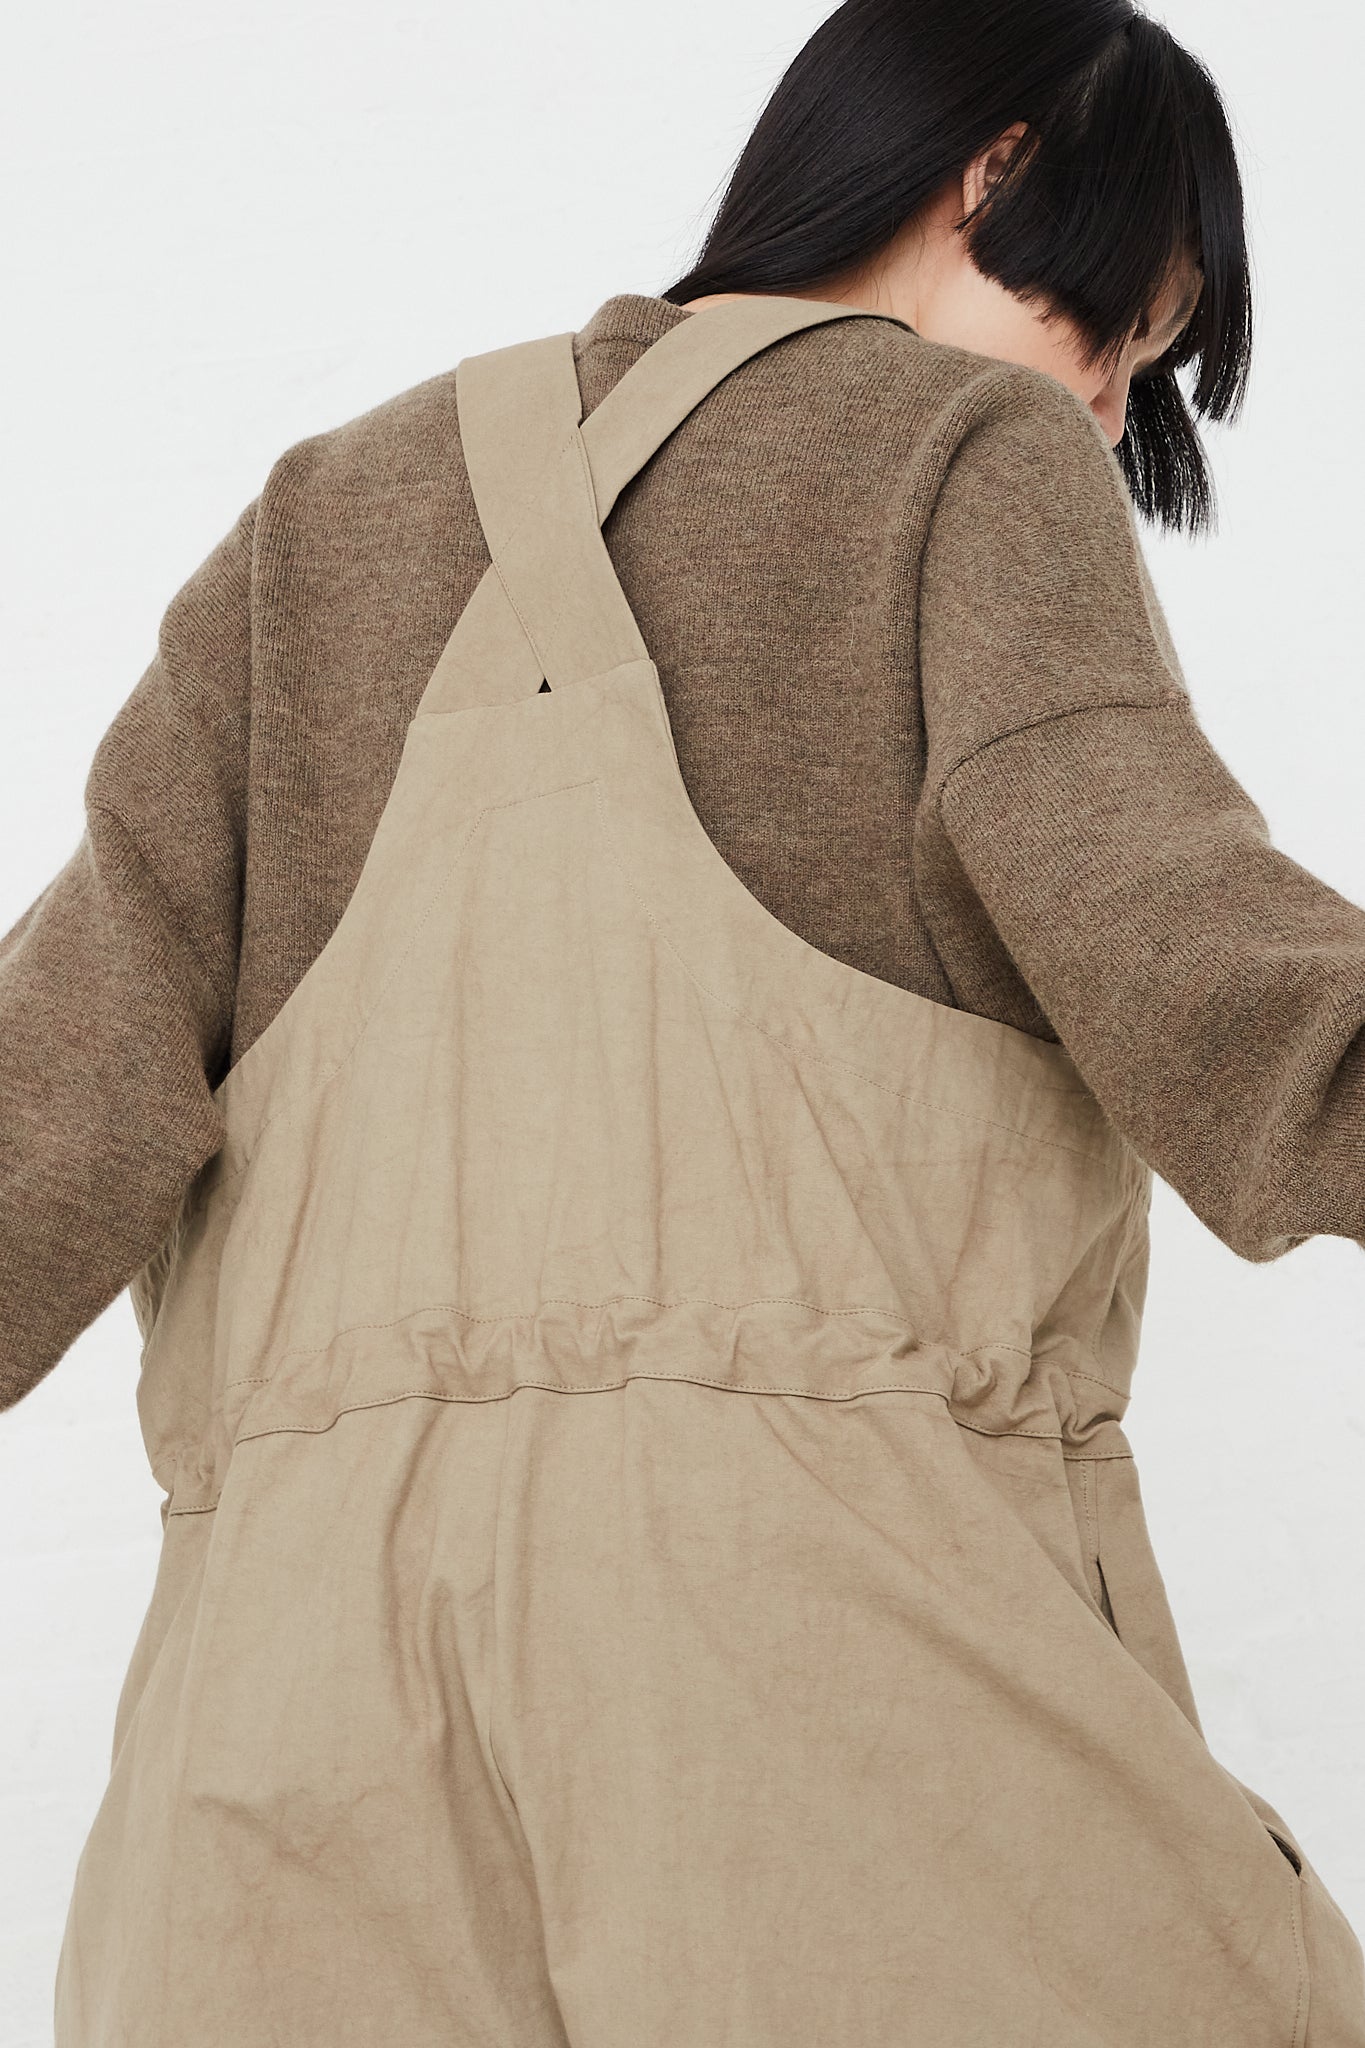 Lightweight Overalls in Drab by Lauren Manoogian for Oroboro Back Upclose